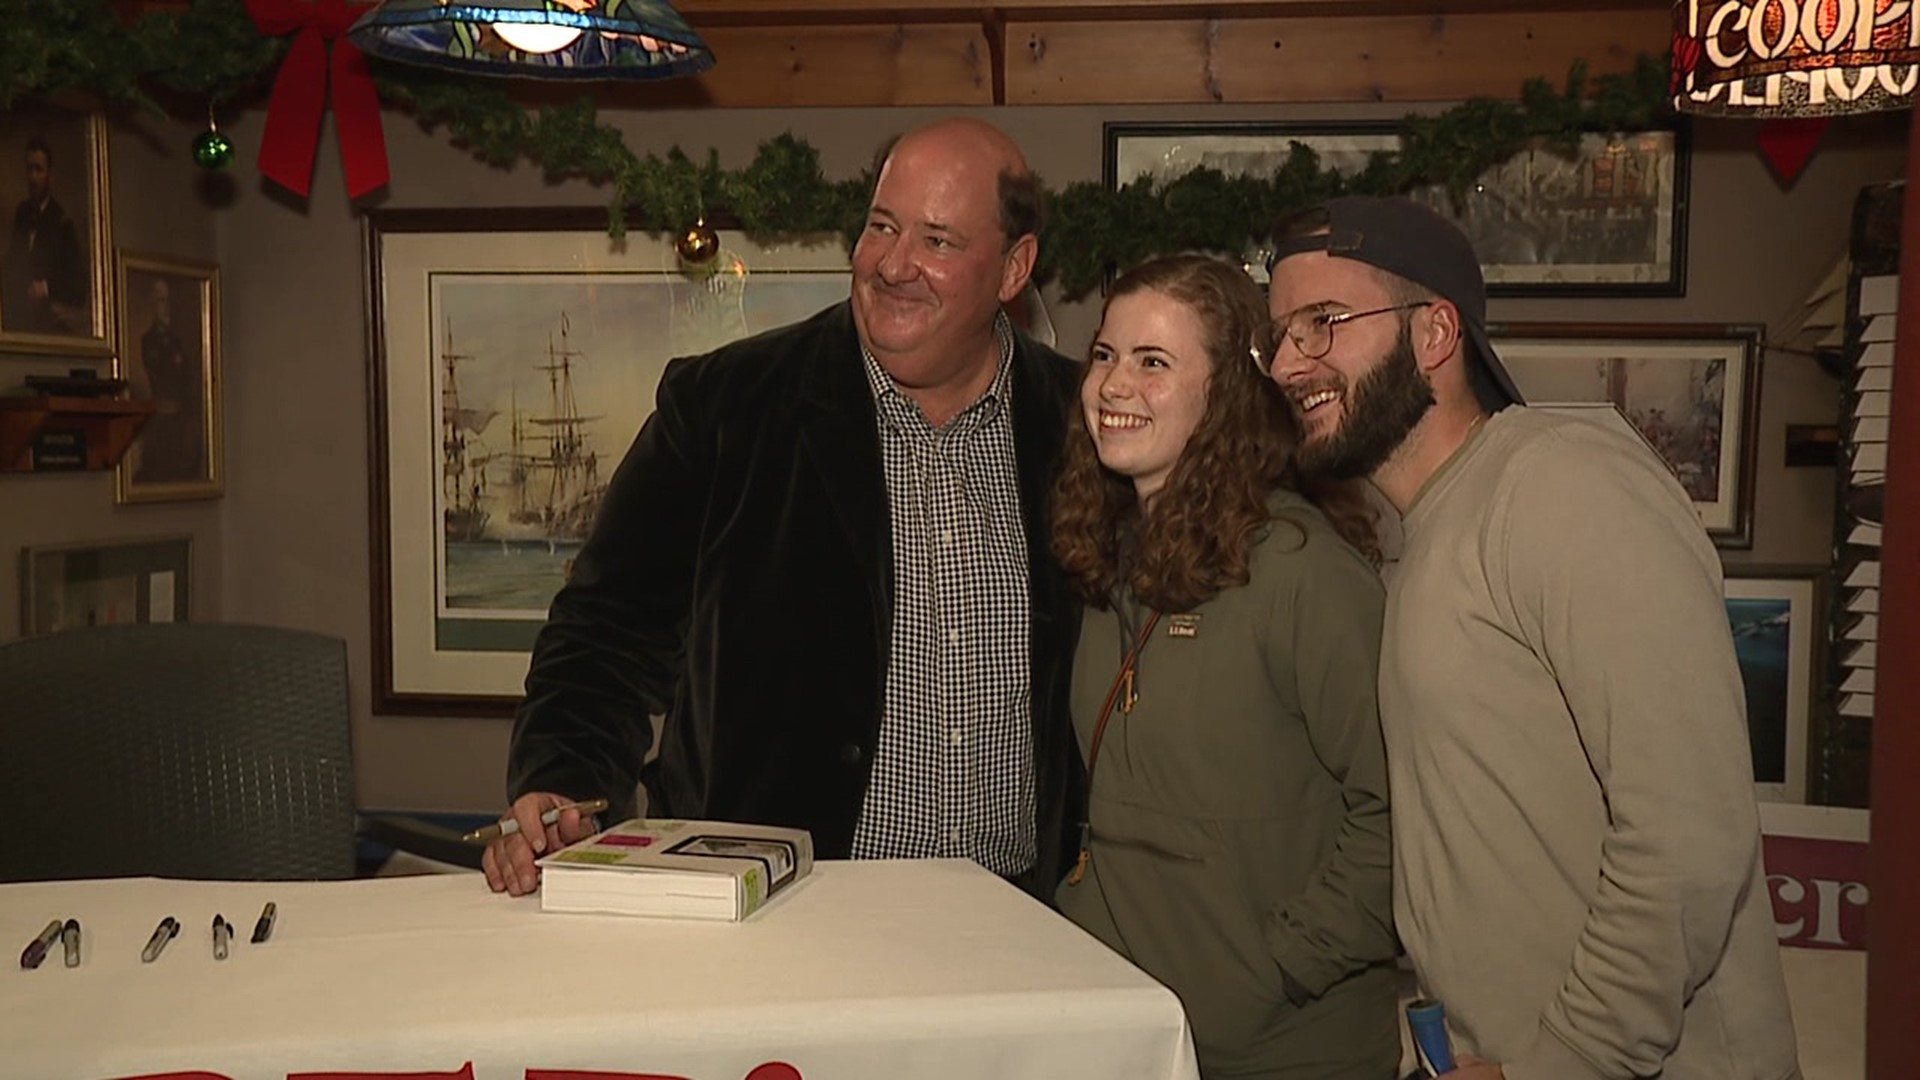 Brian Baumgartner, who played Kevin Malone, made a stop in the Electric City to sign copies of his new book.